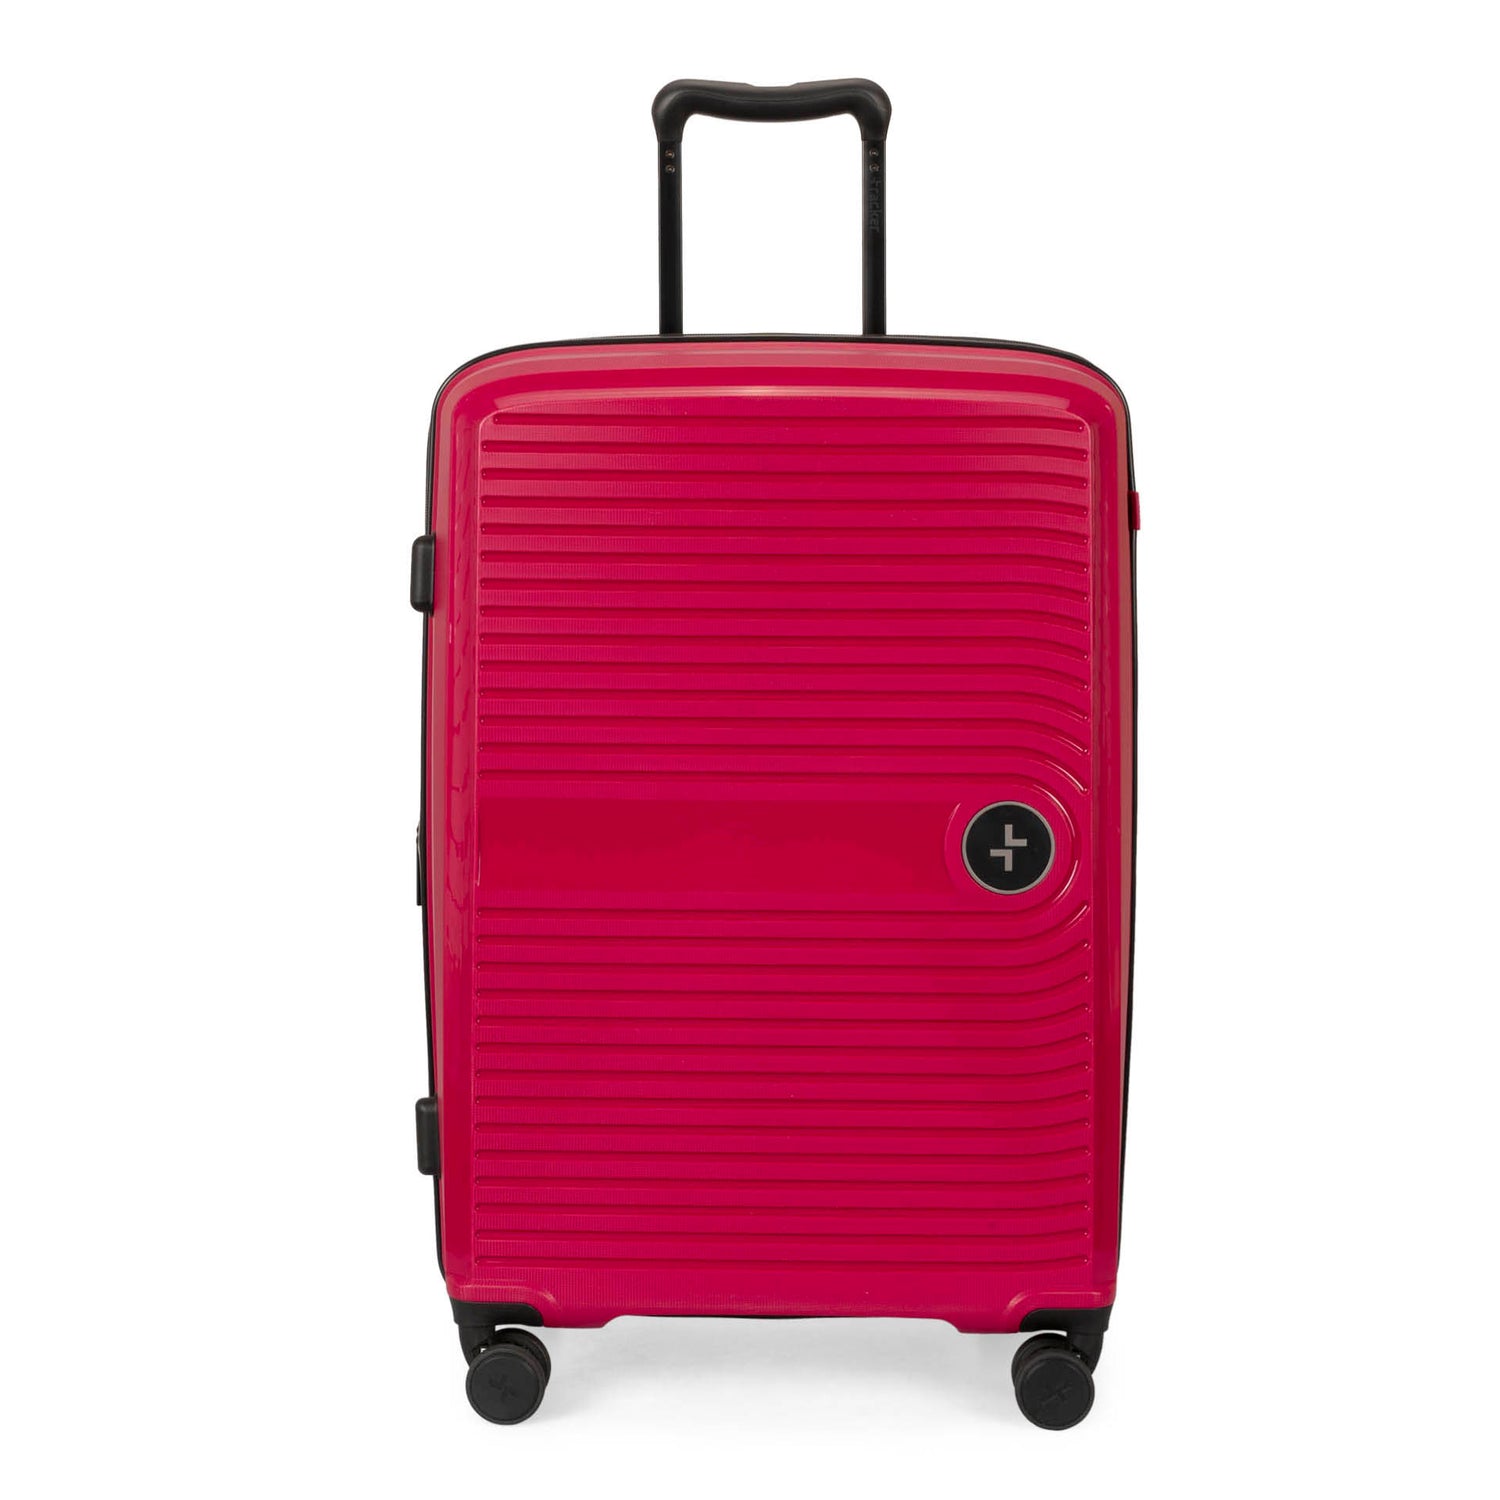 Front side of a red luggage called Dynamo designed by Tracker showing its telescopic handle, lined-pattern shell, and tracker symbol embossed on the front.